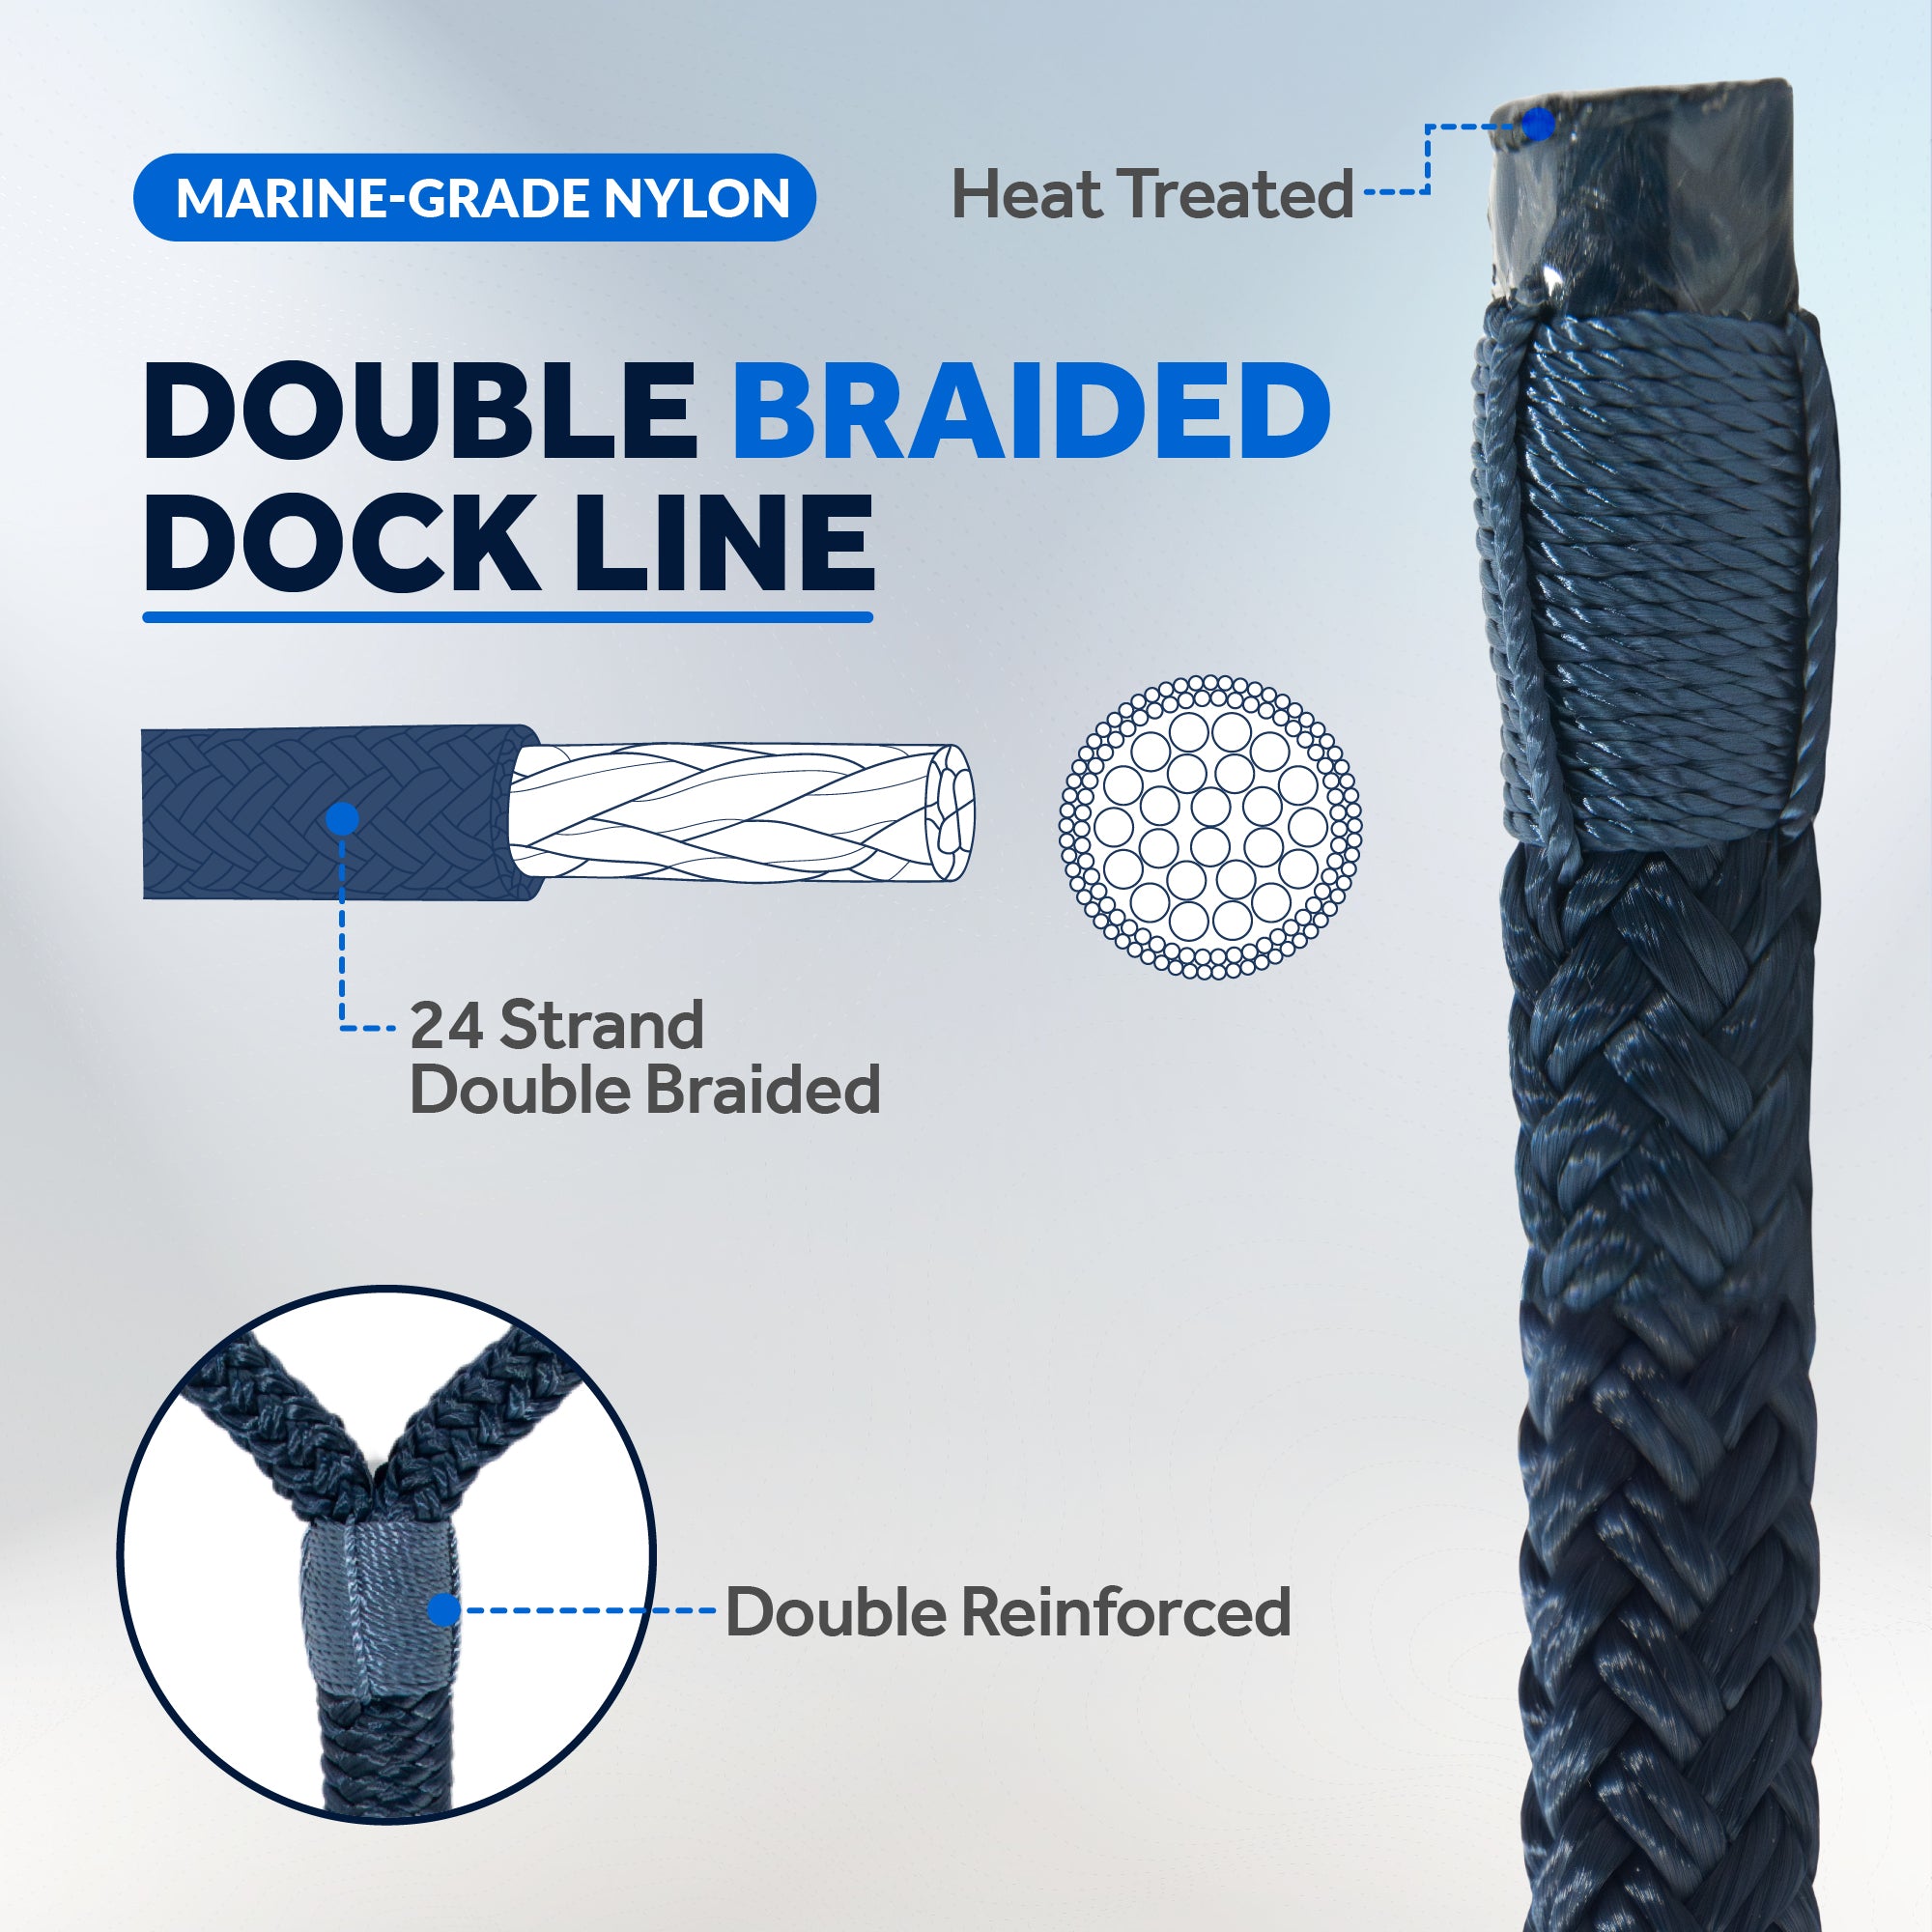 Five Oceans 4-Pack 1/2 inch x 15' Boat Dock Lines with 12 inch Eyelet, Marine-Grade Navy Blue Premium Double Braided Nylon Boat Rope 1/2 inch, Boat